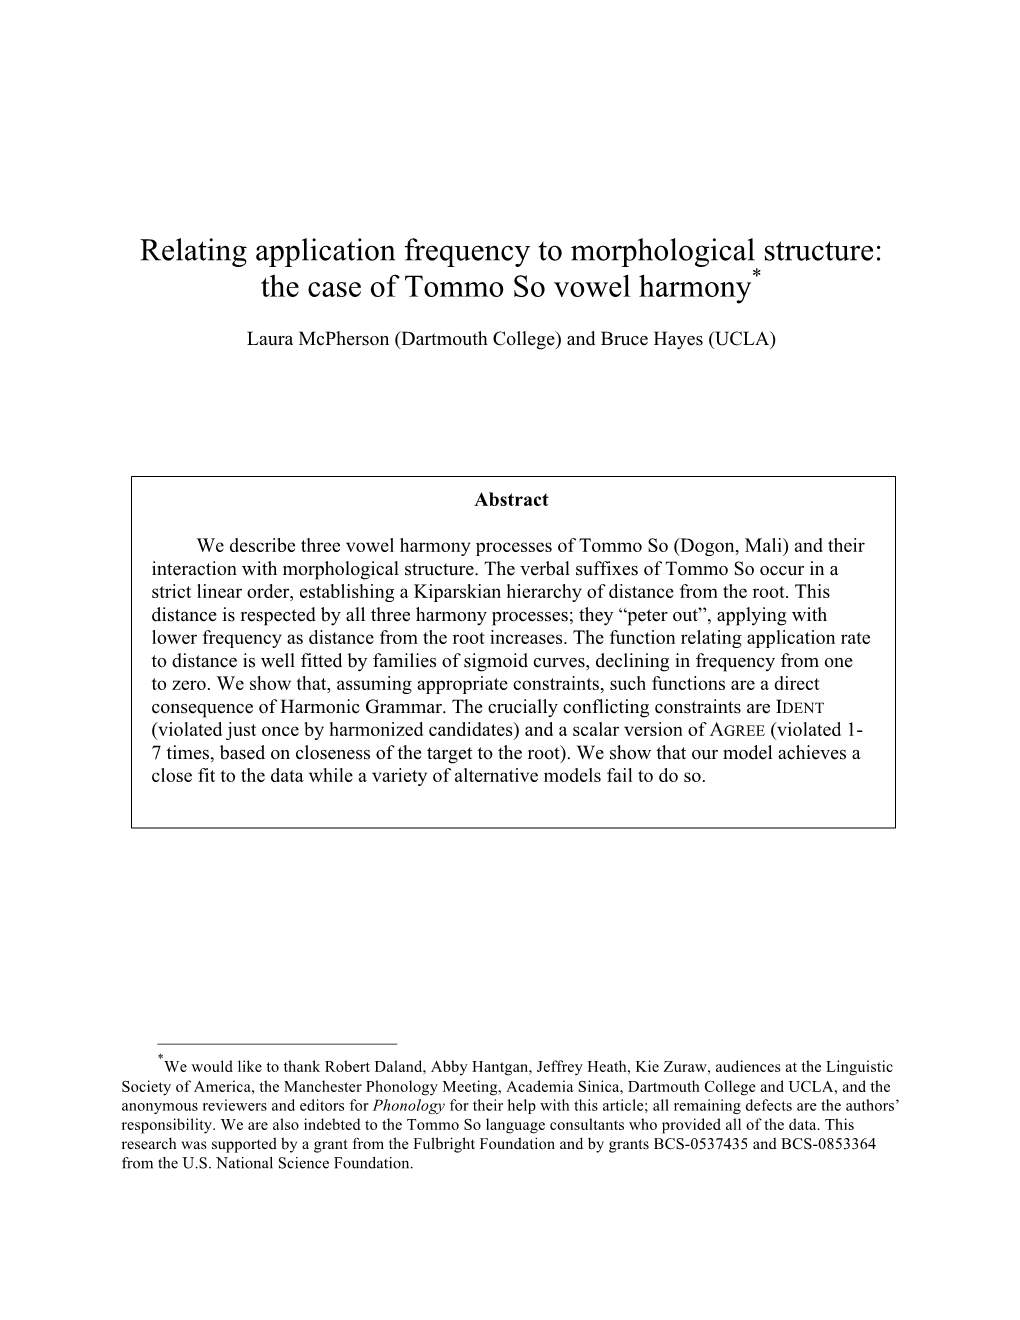 Relating Application Frequency to Morphological Structure: the Case of Tommo So Vowel Harmony*